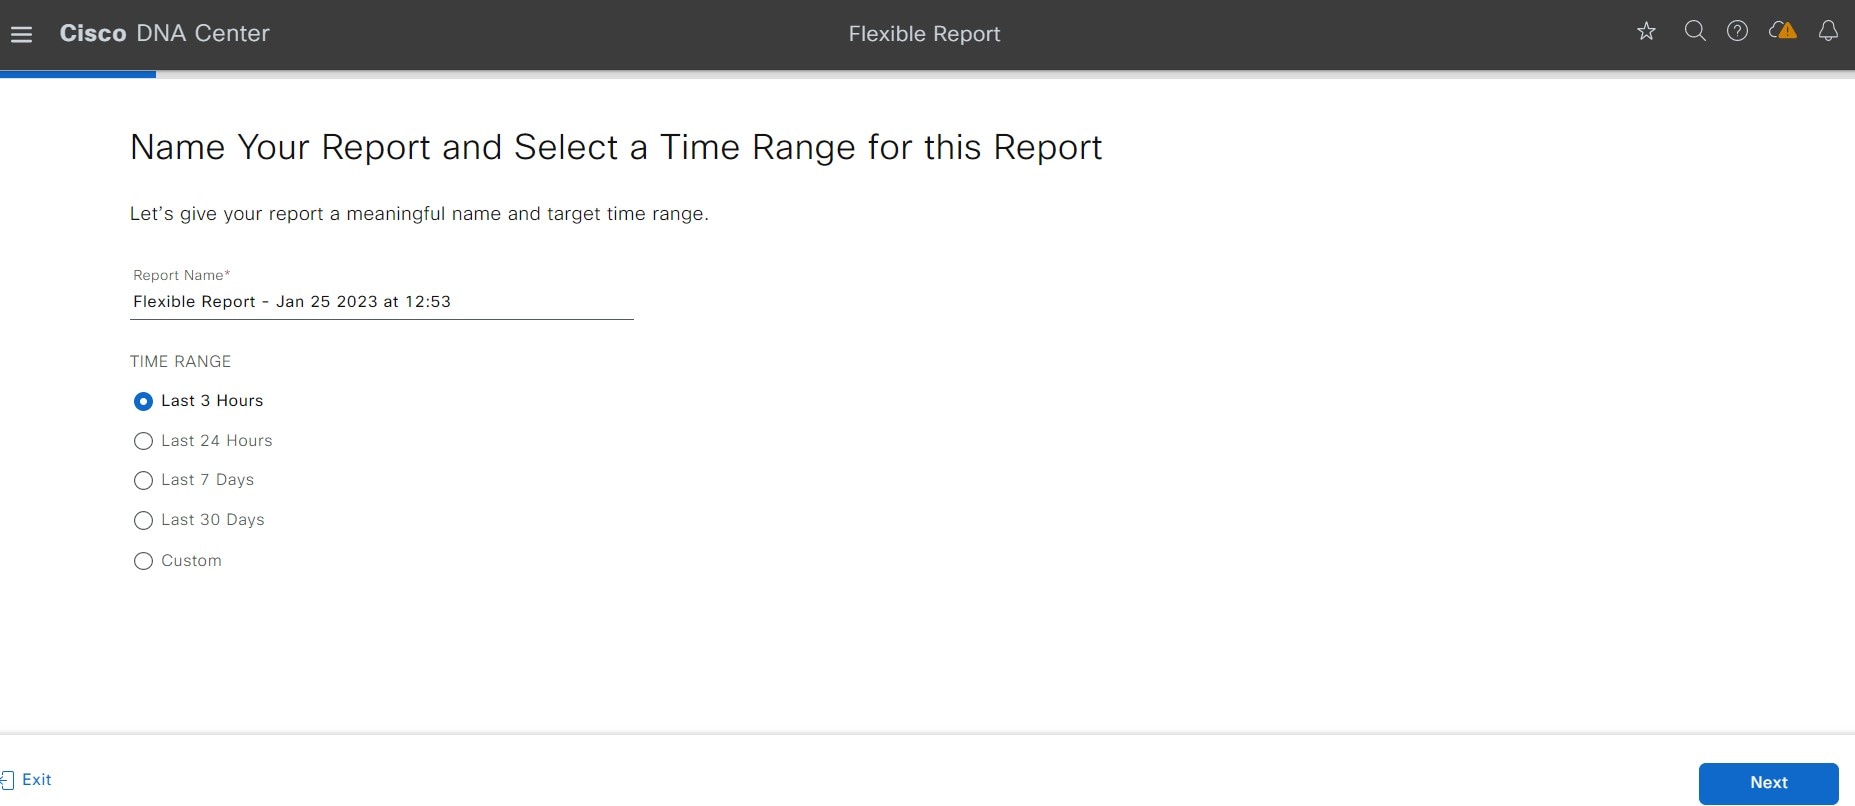 Window displays the Name Your Report and Select a Time Range for this Report page